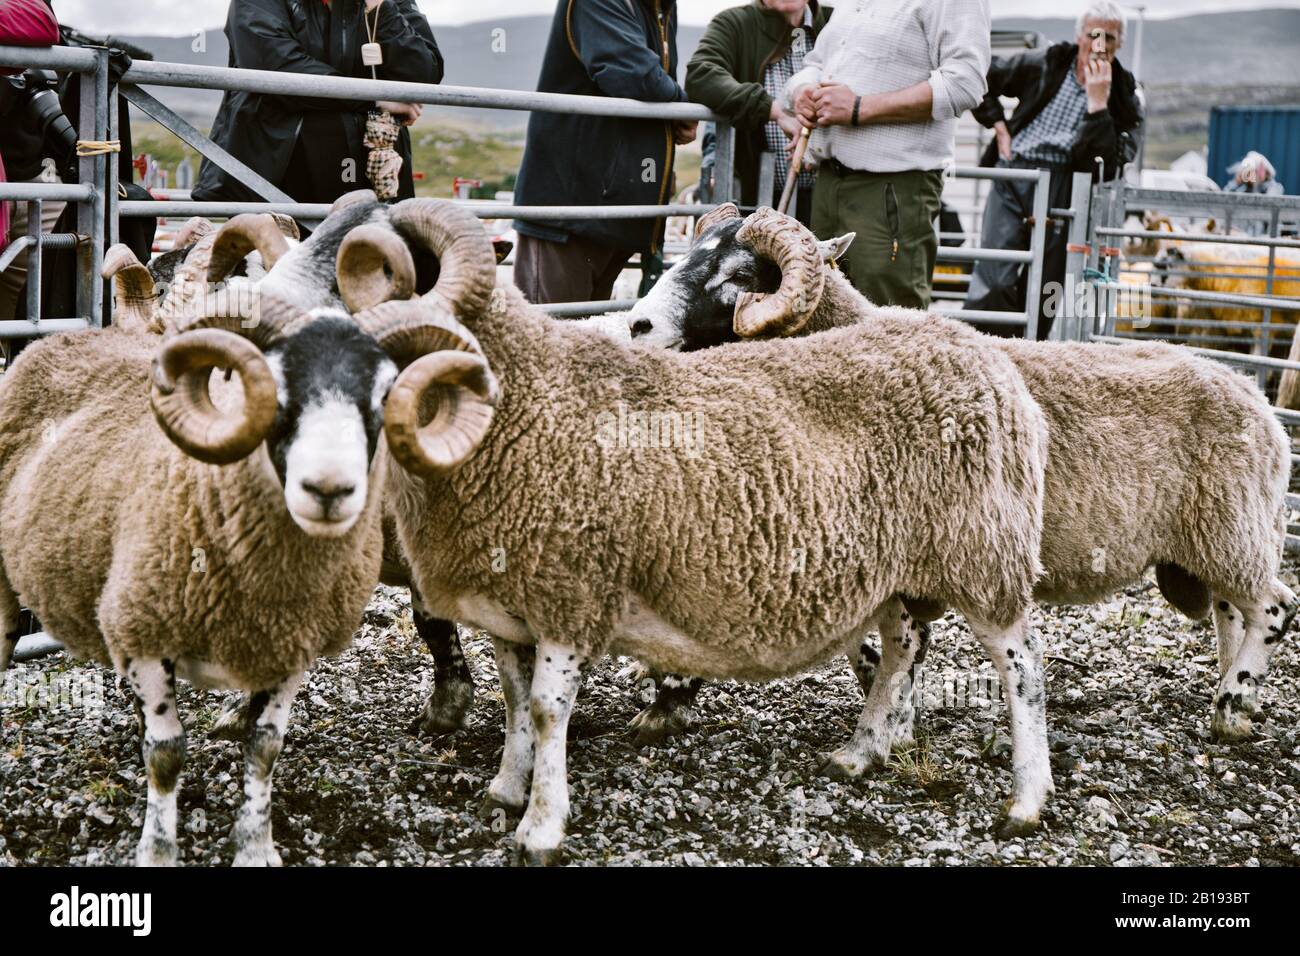 Sheep in judging area at North Harris Agricultural Show, Tarbert, Isle of Harris, Outer Hebrides, Scotland Stock Photo